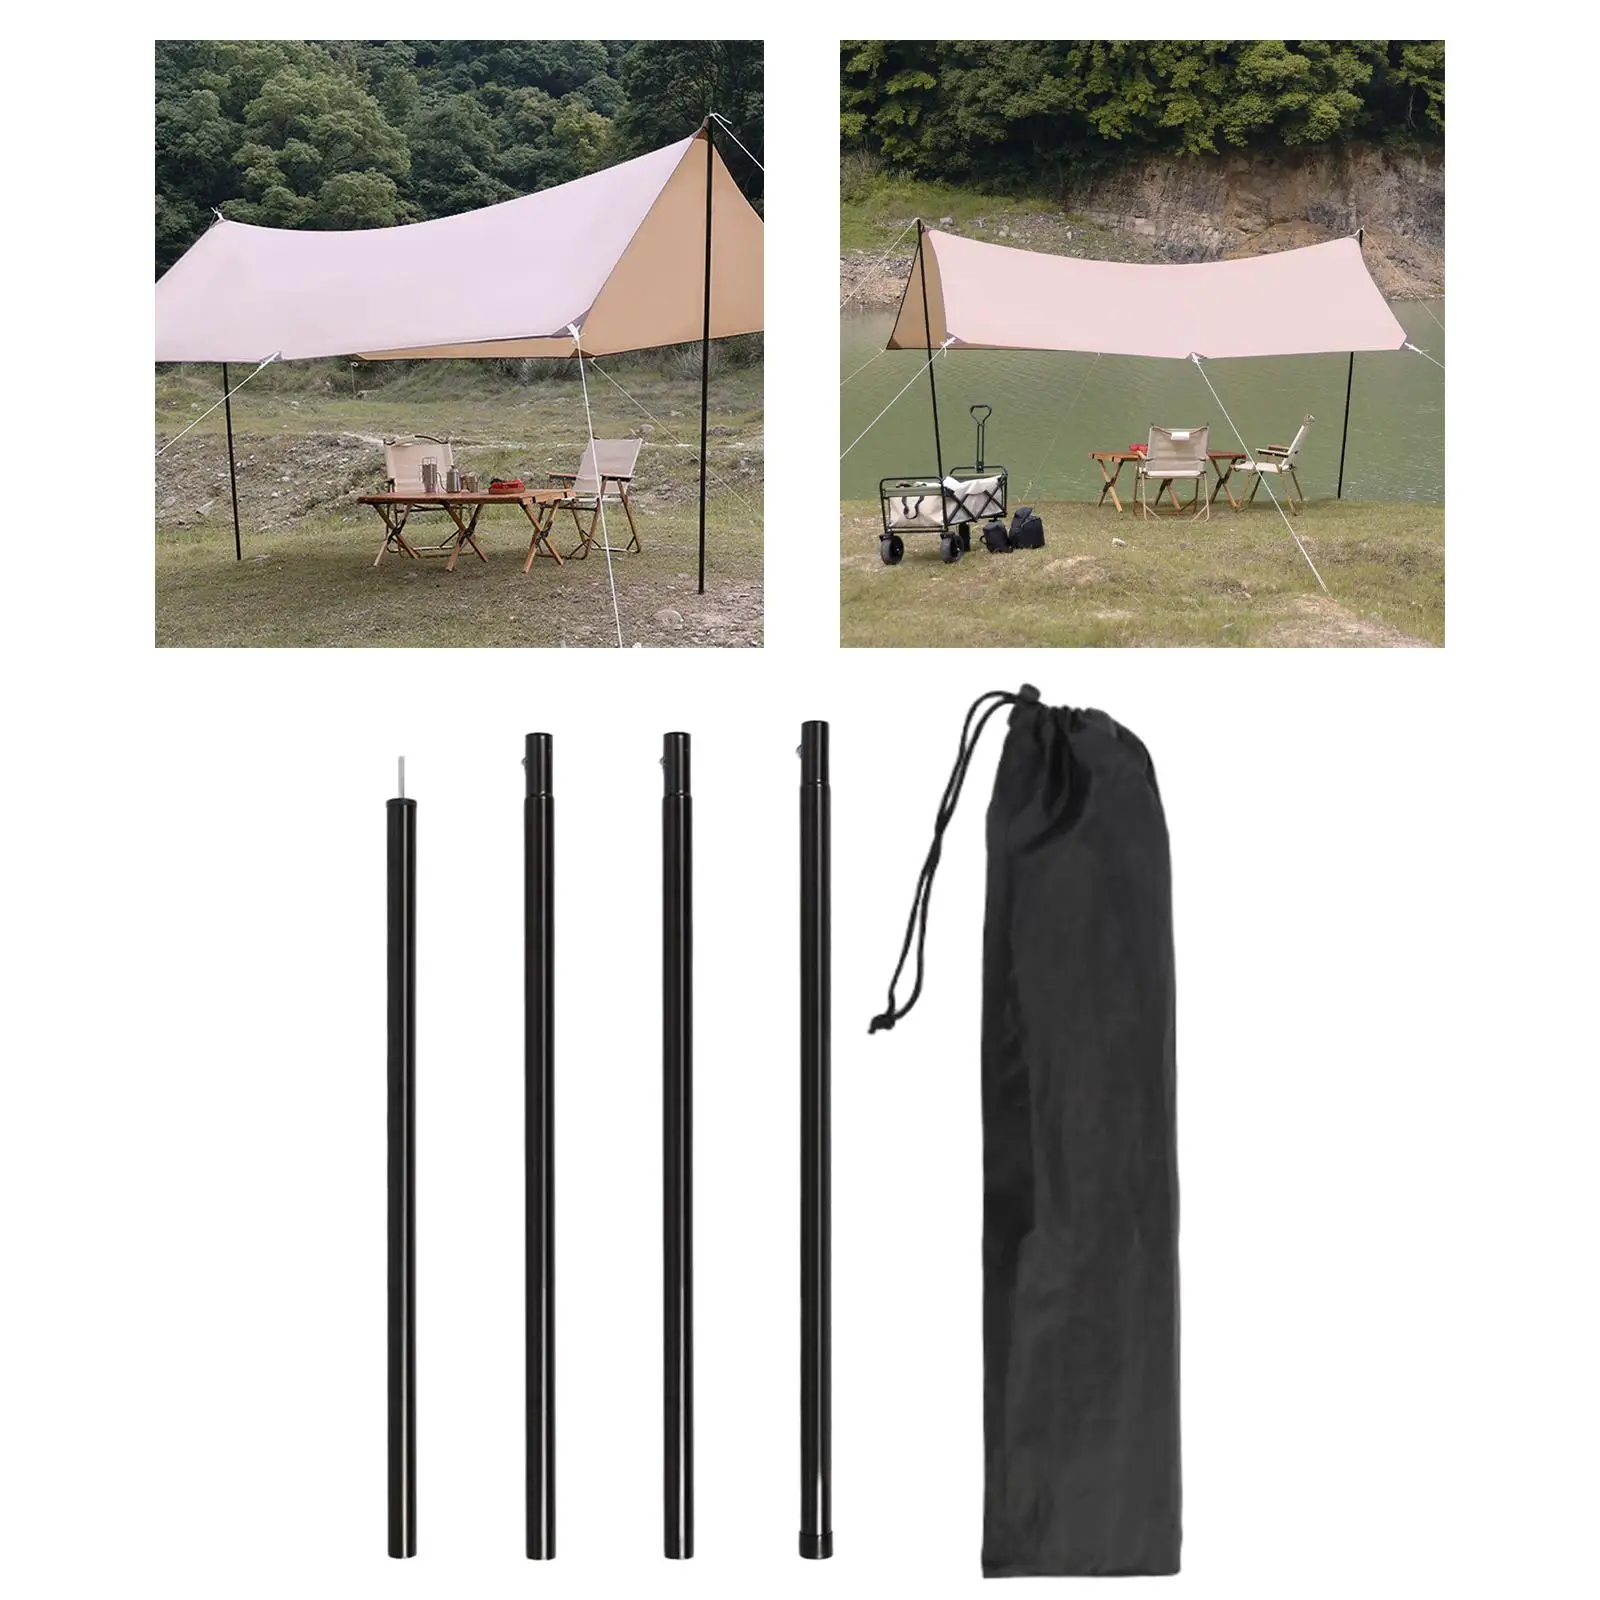 4 Pieces Tarp Poles Camping Tent Rods with Storage Bag Tent Rods for Tarp Tent Awning Outdoor Camping Hiking Canopy